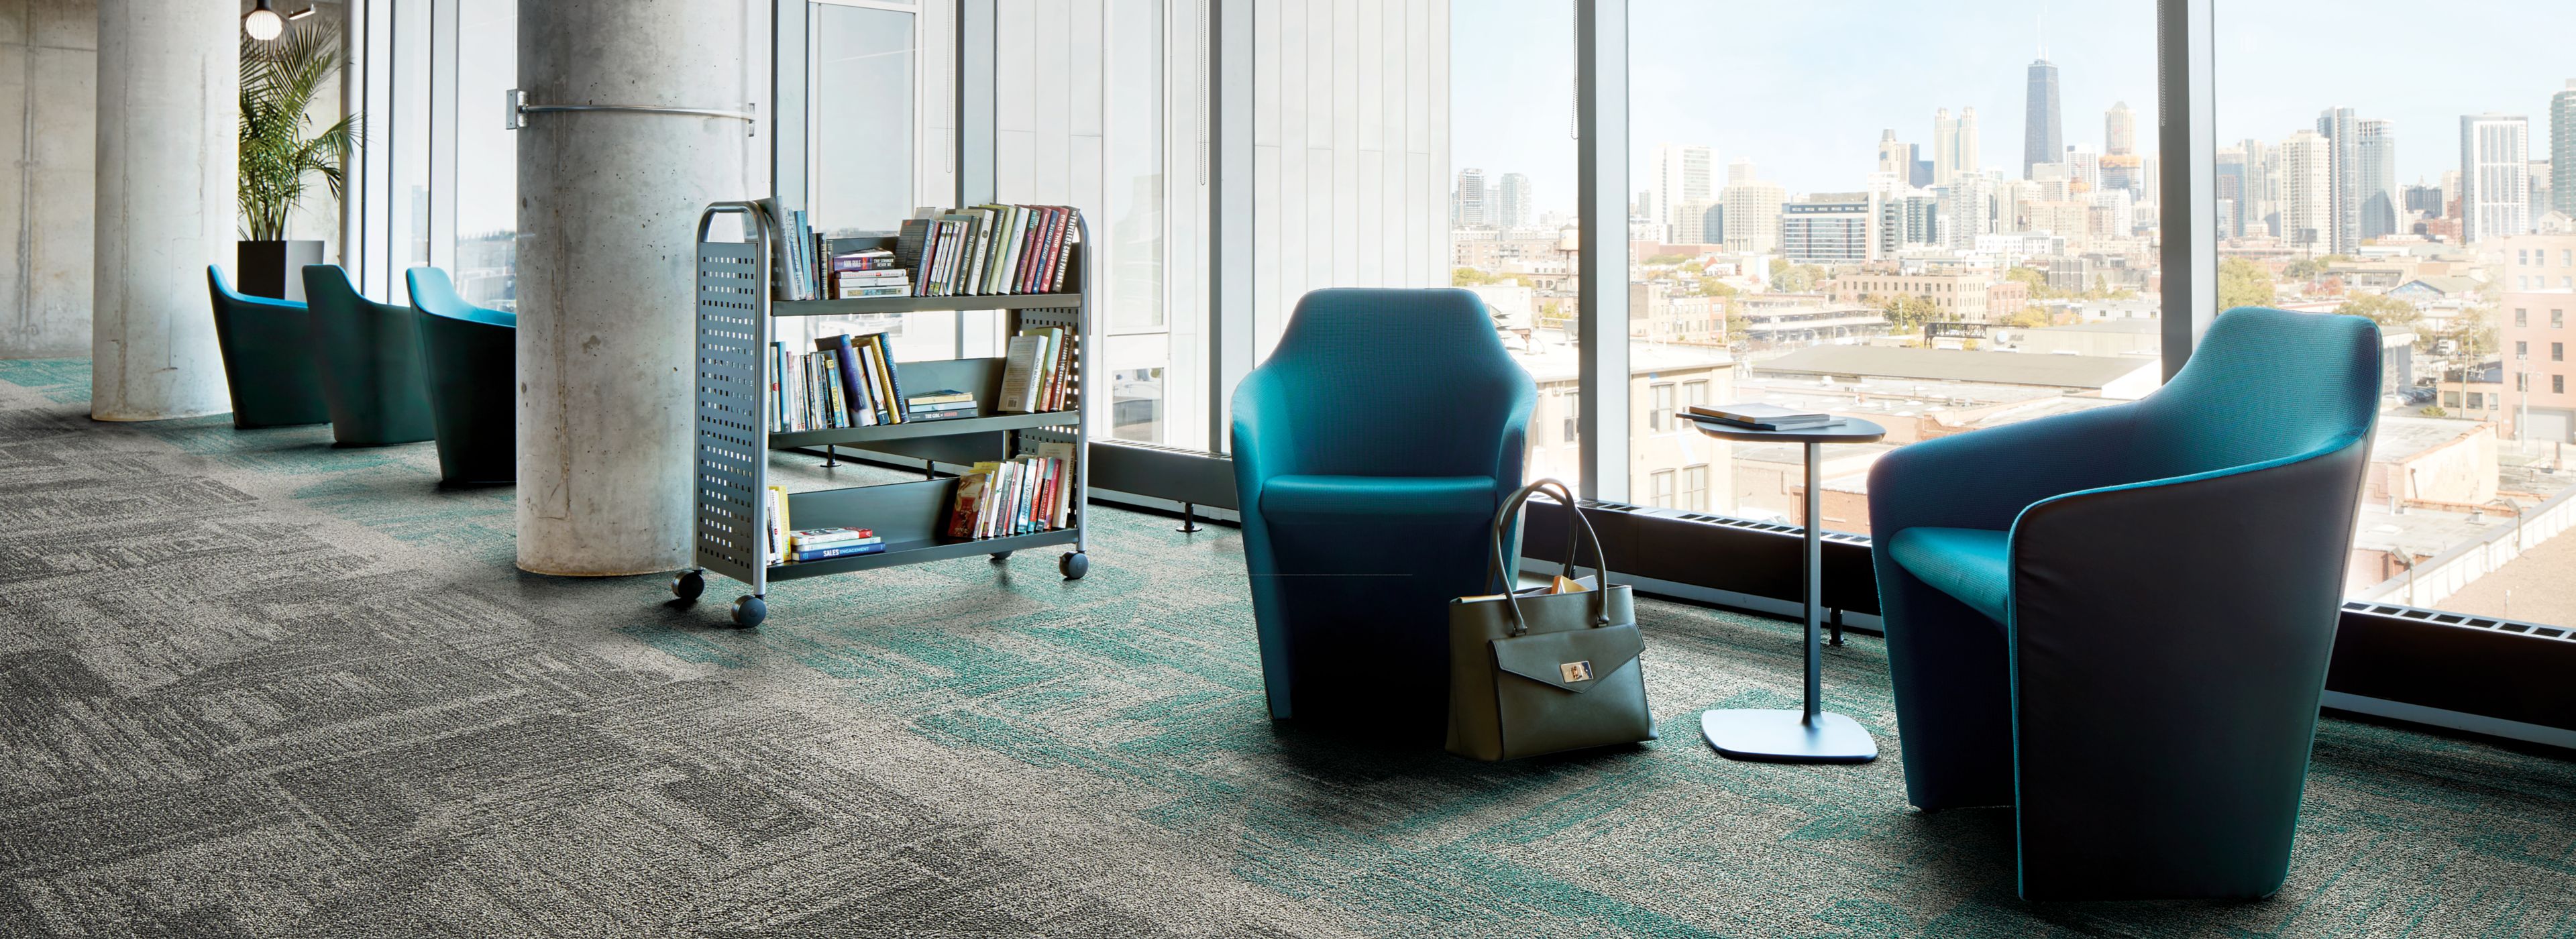 Interface Open Air 403 carpet tile in library with cement columns and city skyline in background through windows image number 1